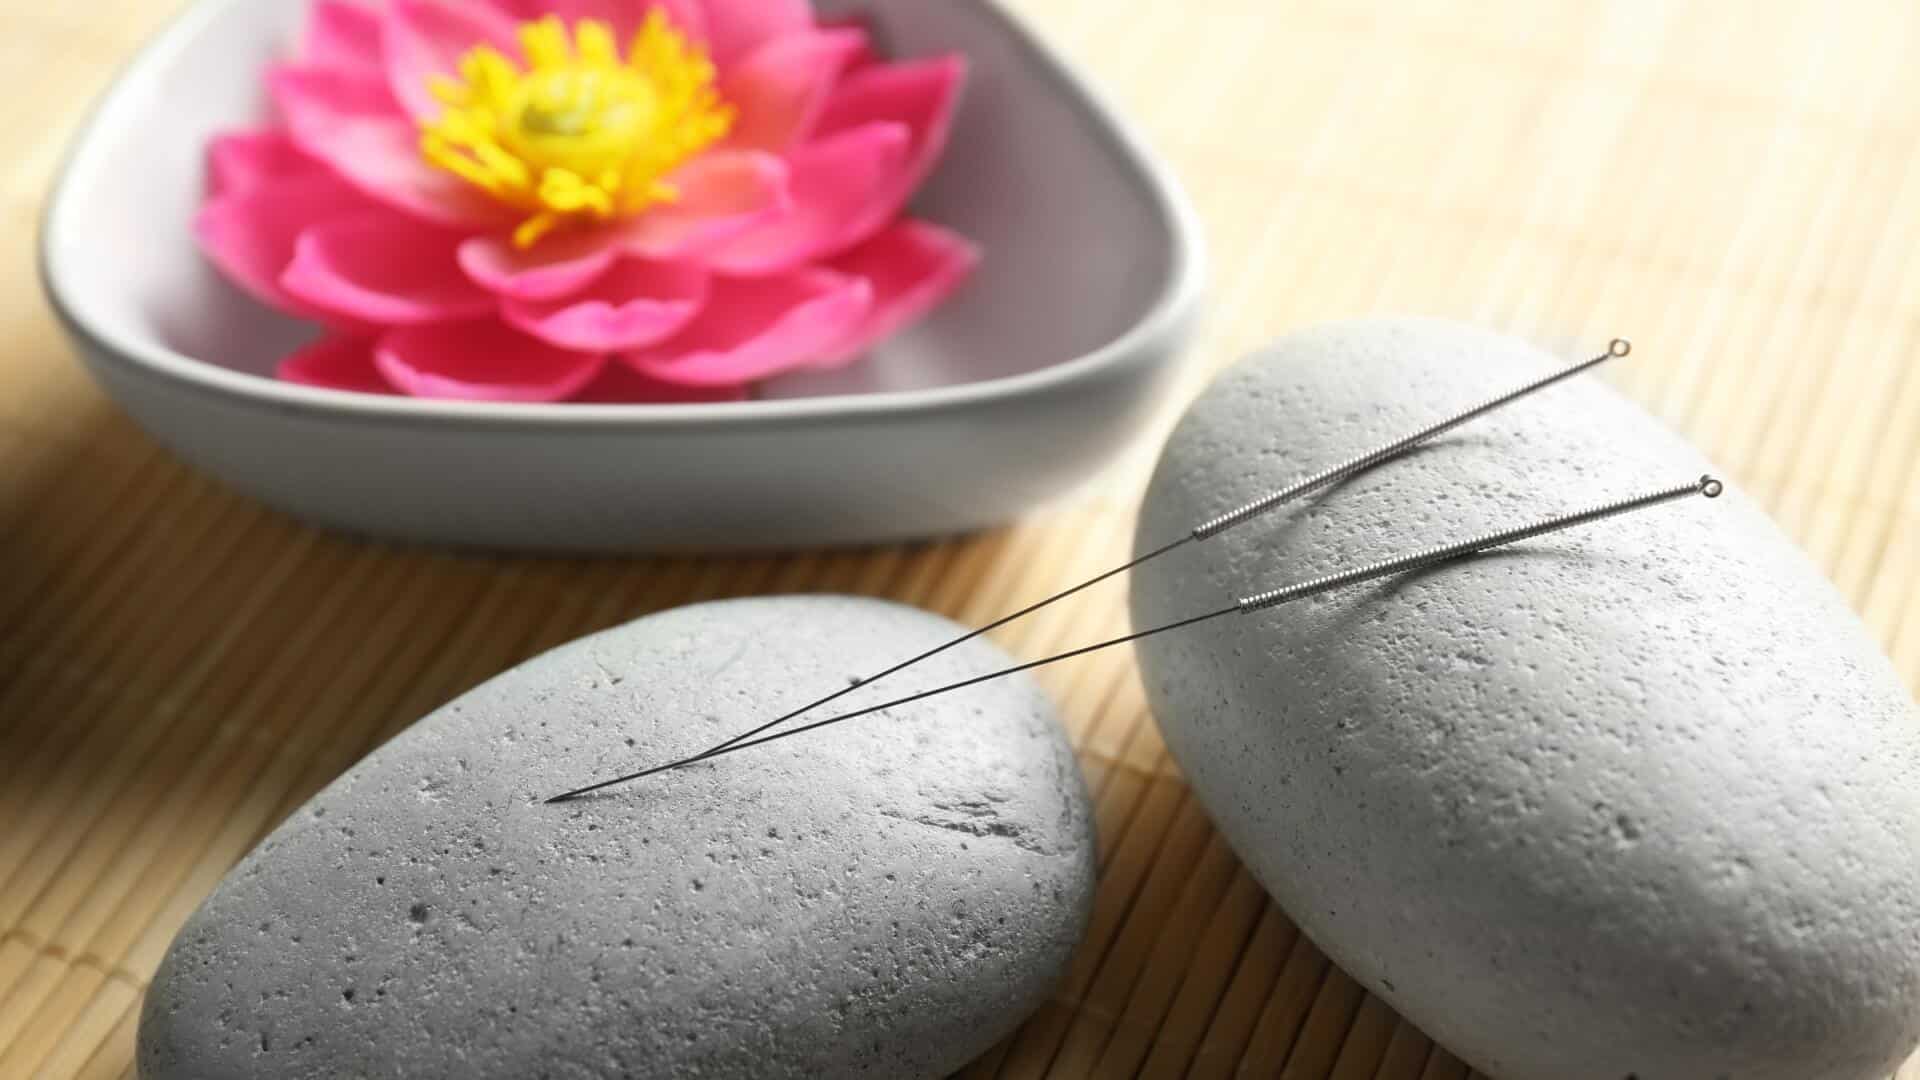 acupuncture needles with stones on bamboo mat